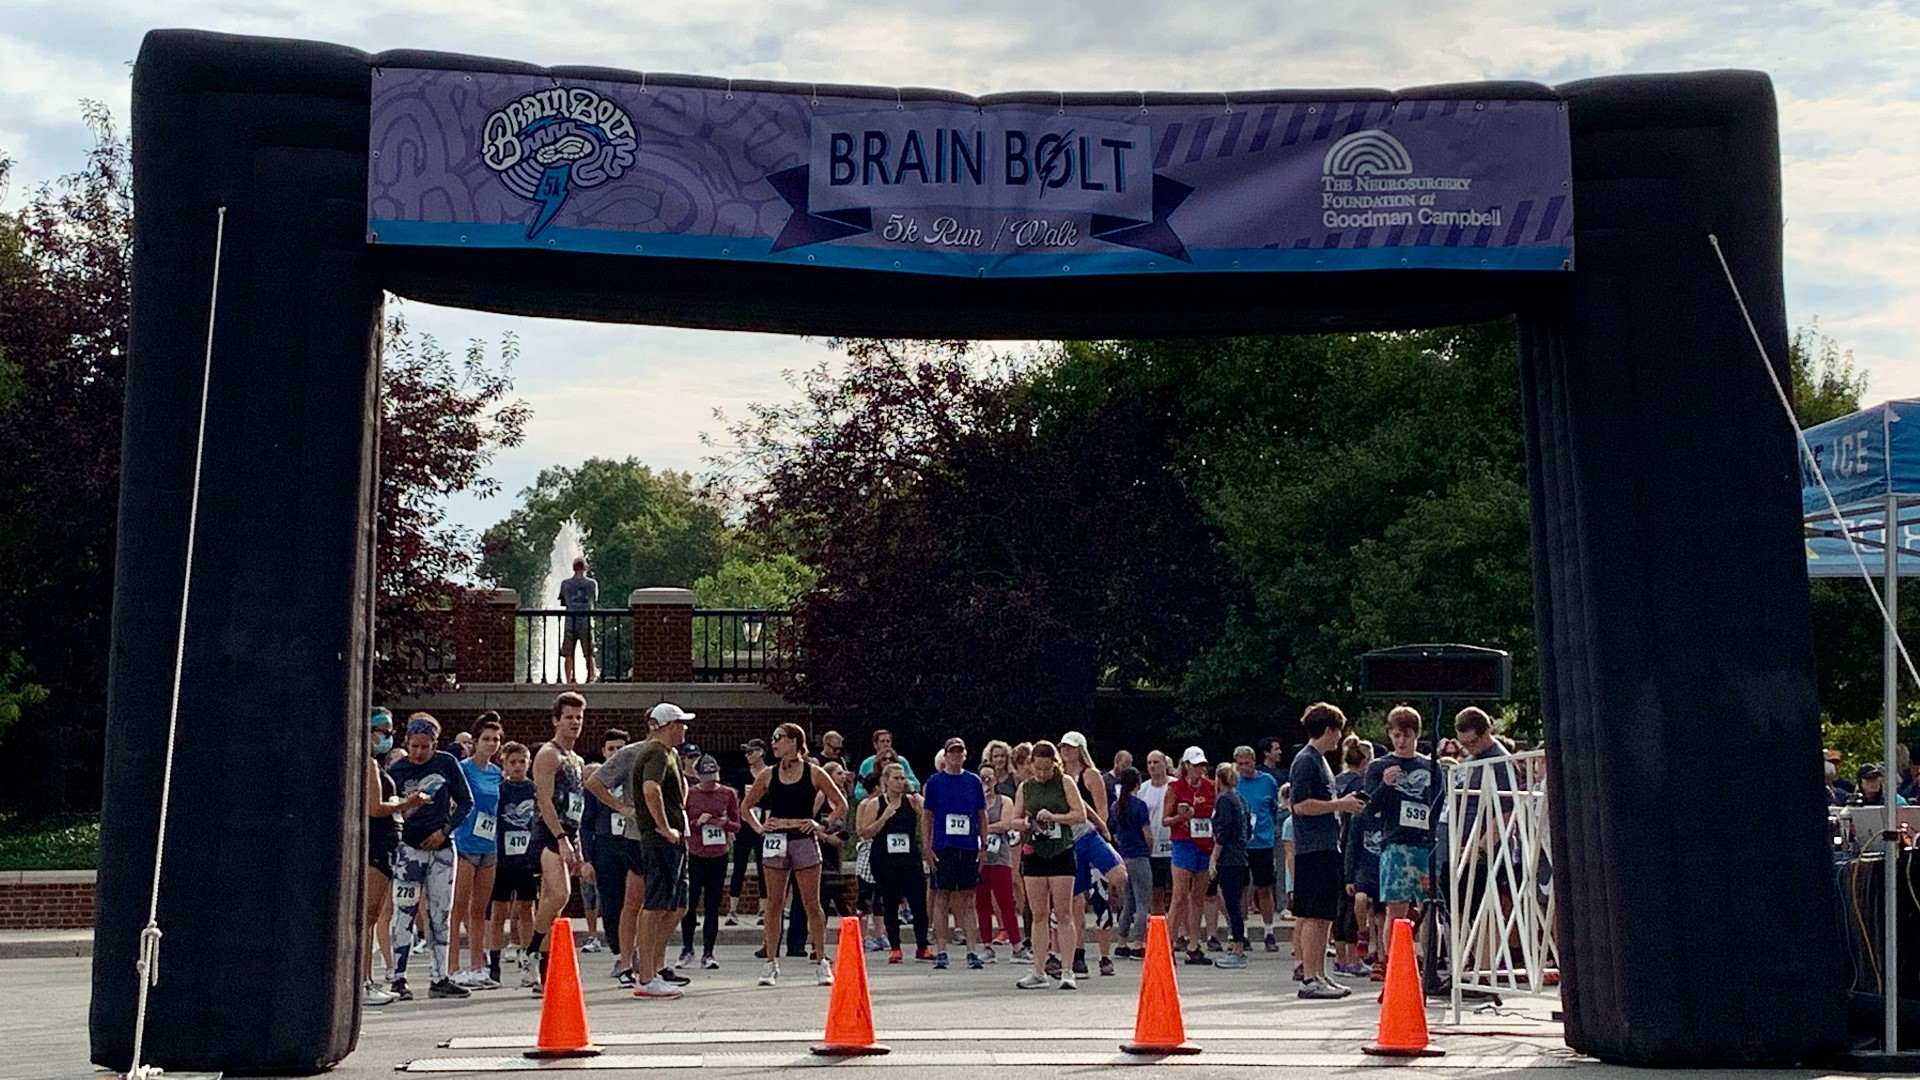 About 500 runners and walkers participated in the Brain Bolt 5K. Together they raised more than $140,000.